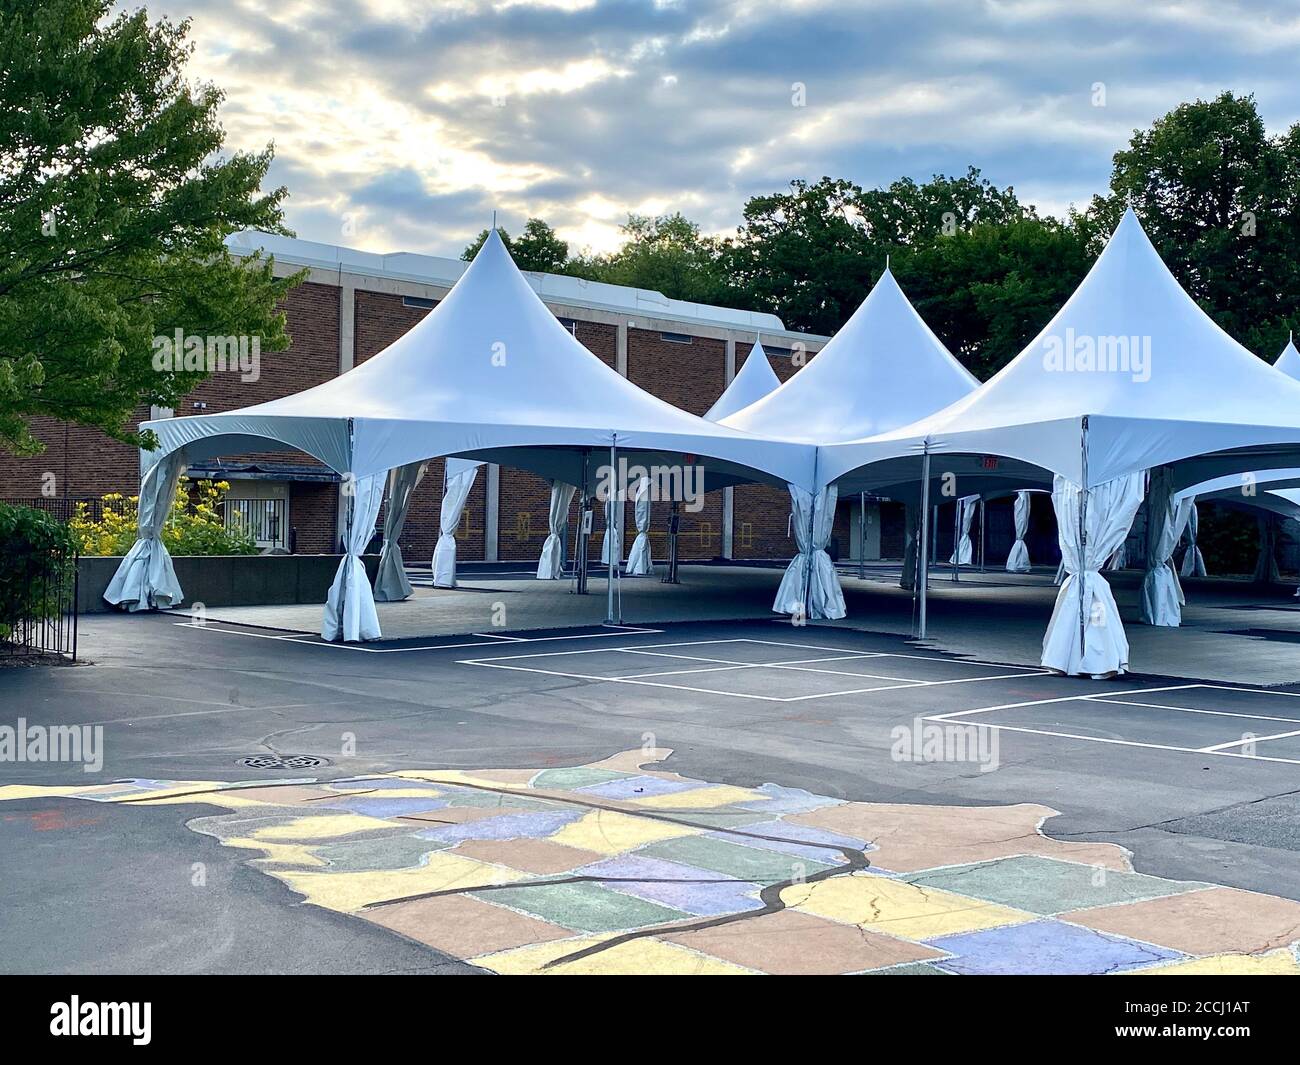 Schools prepare for in-person learning by constructing tents on the blacktop for outdoor classrooms during the Coronavirus pandemic. Stock Photo